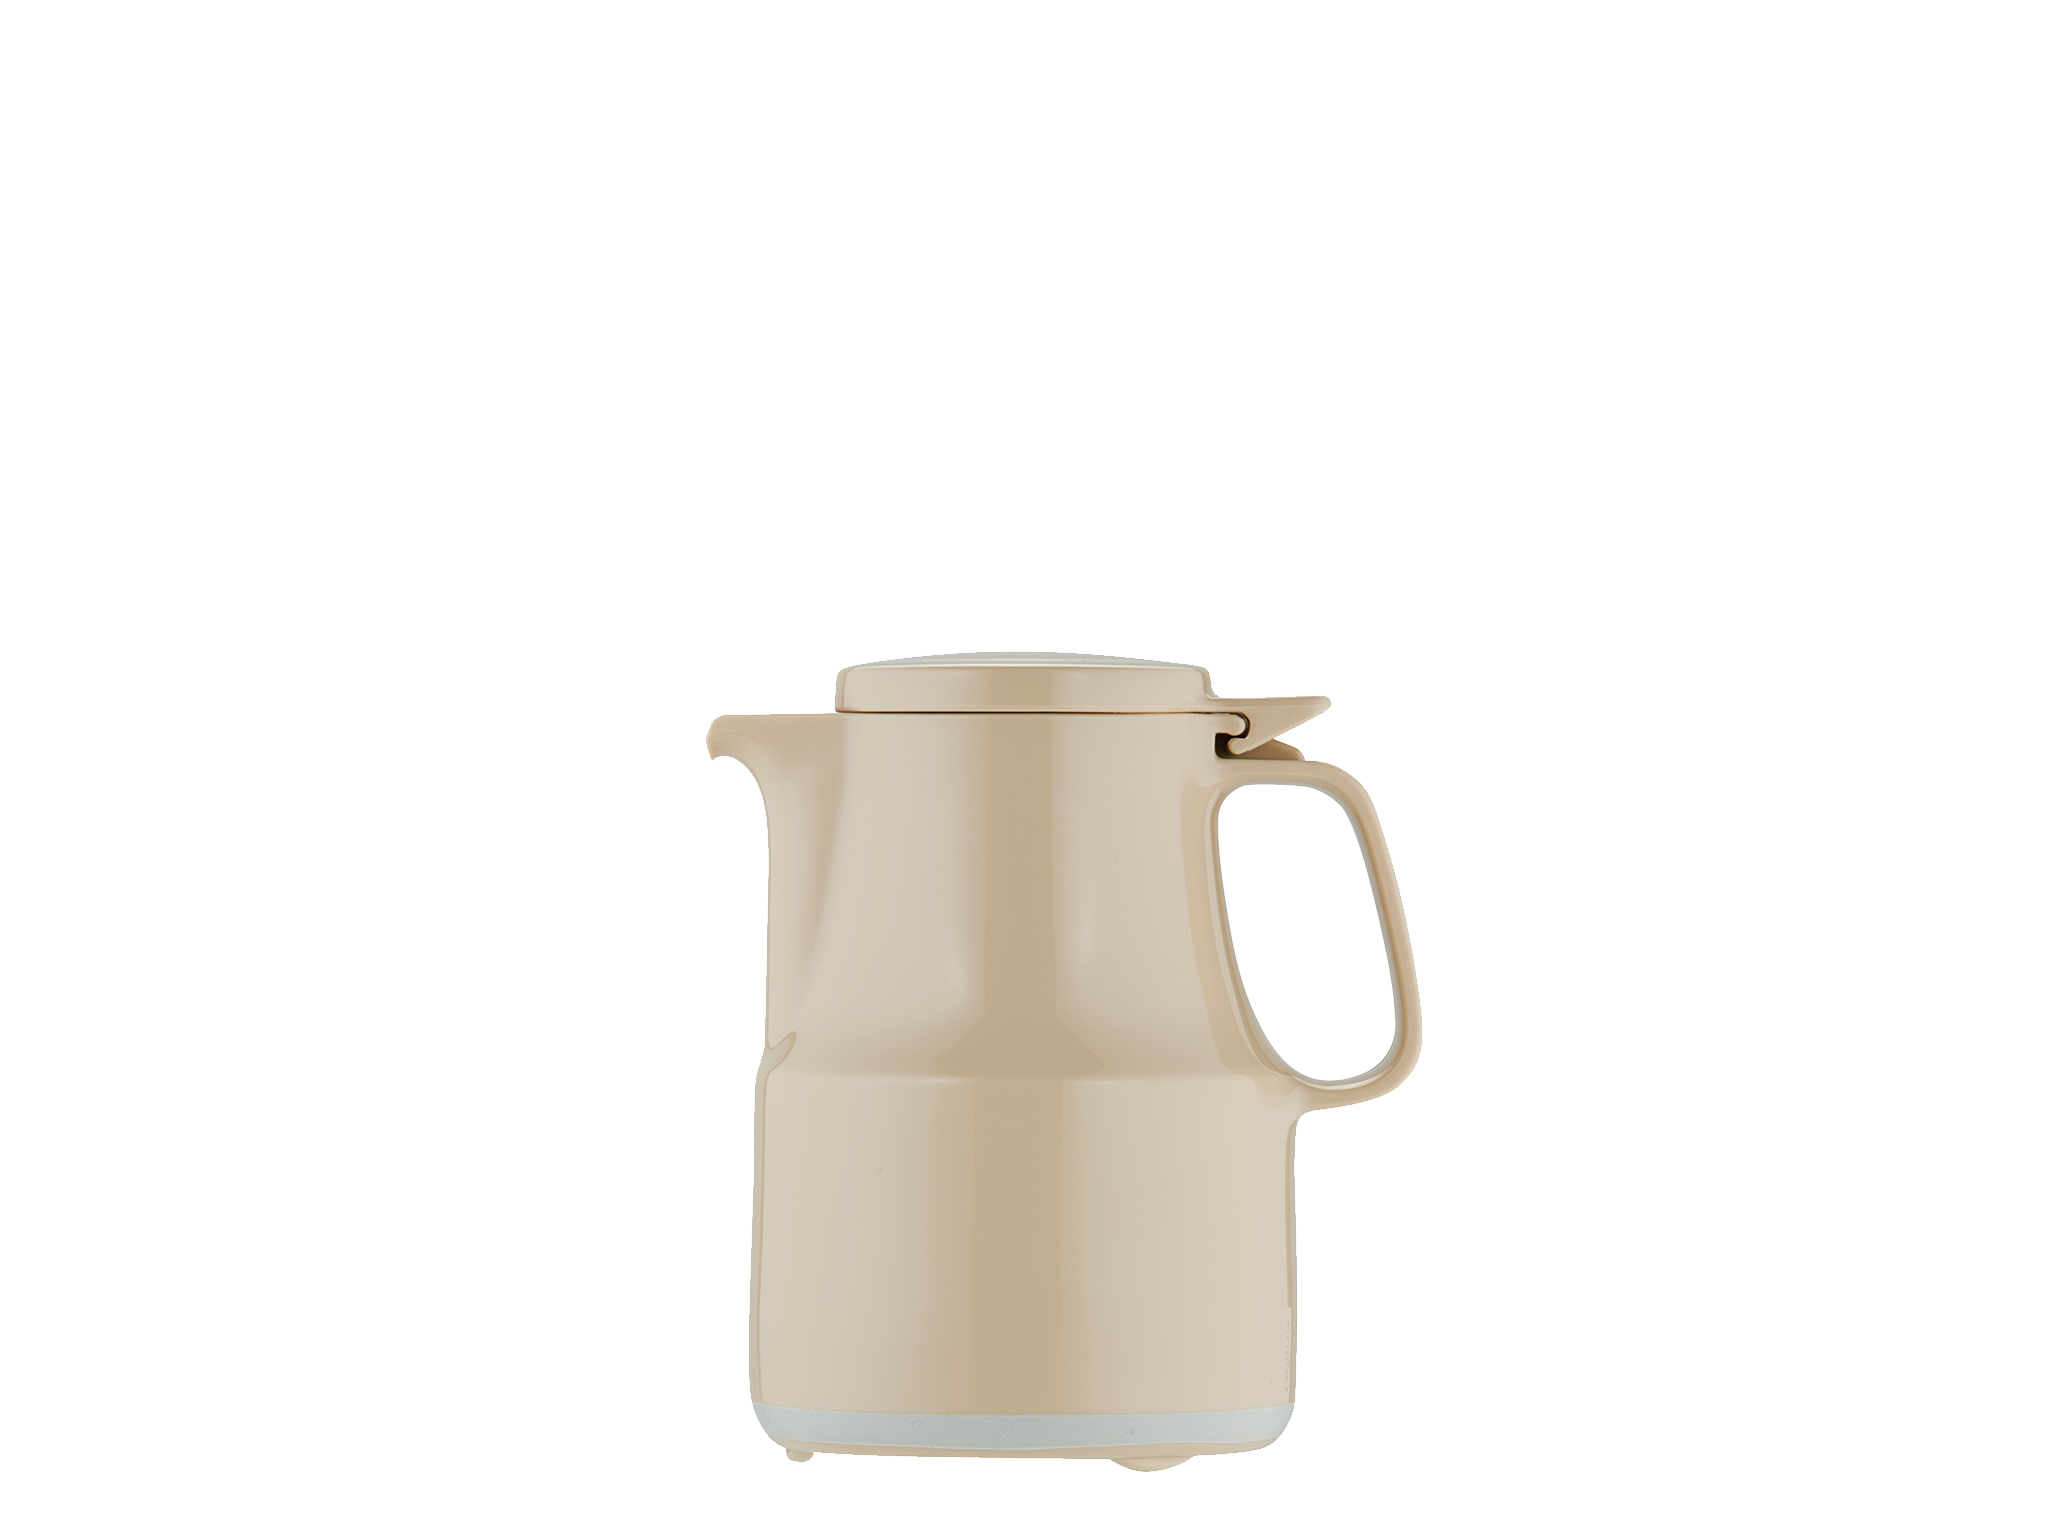 7341-042 - Vacuum carafe beige 0.3 L THERMOBOY - Helios